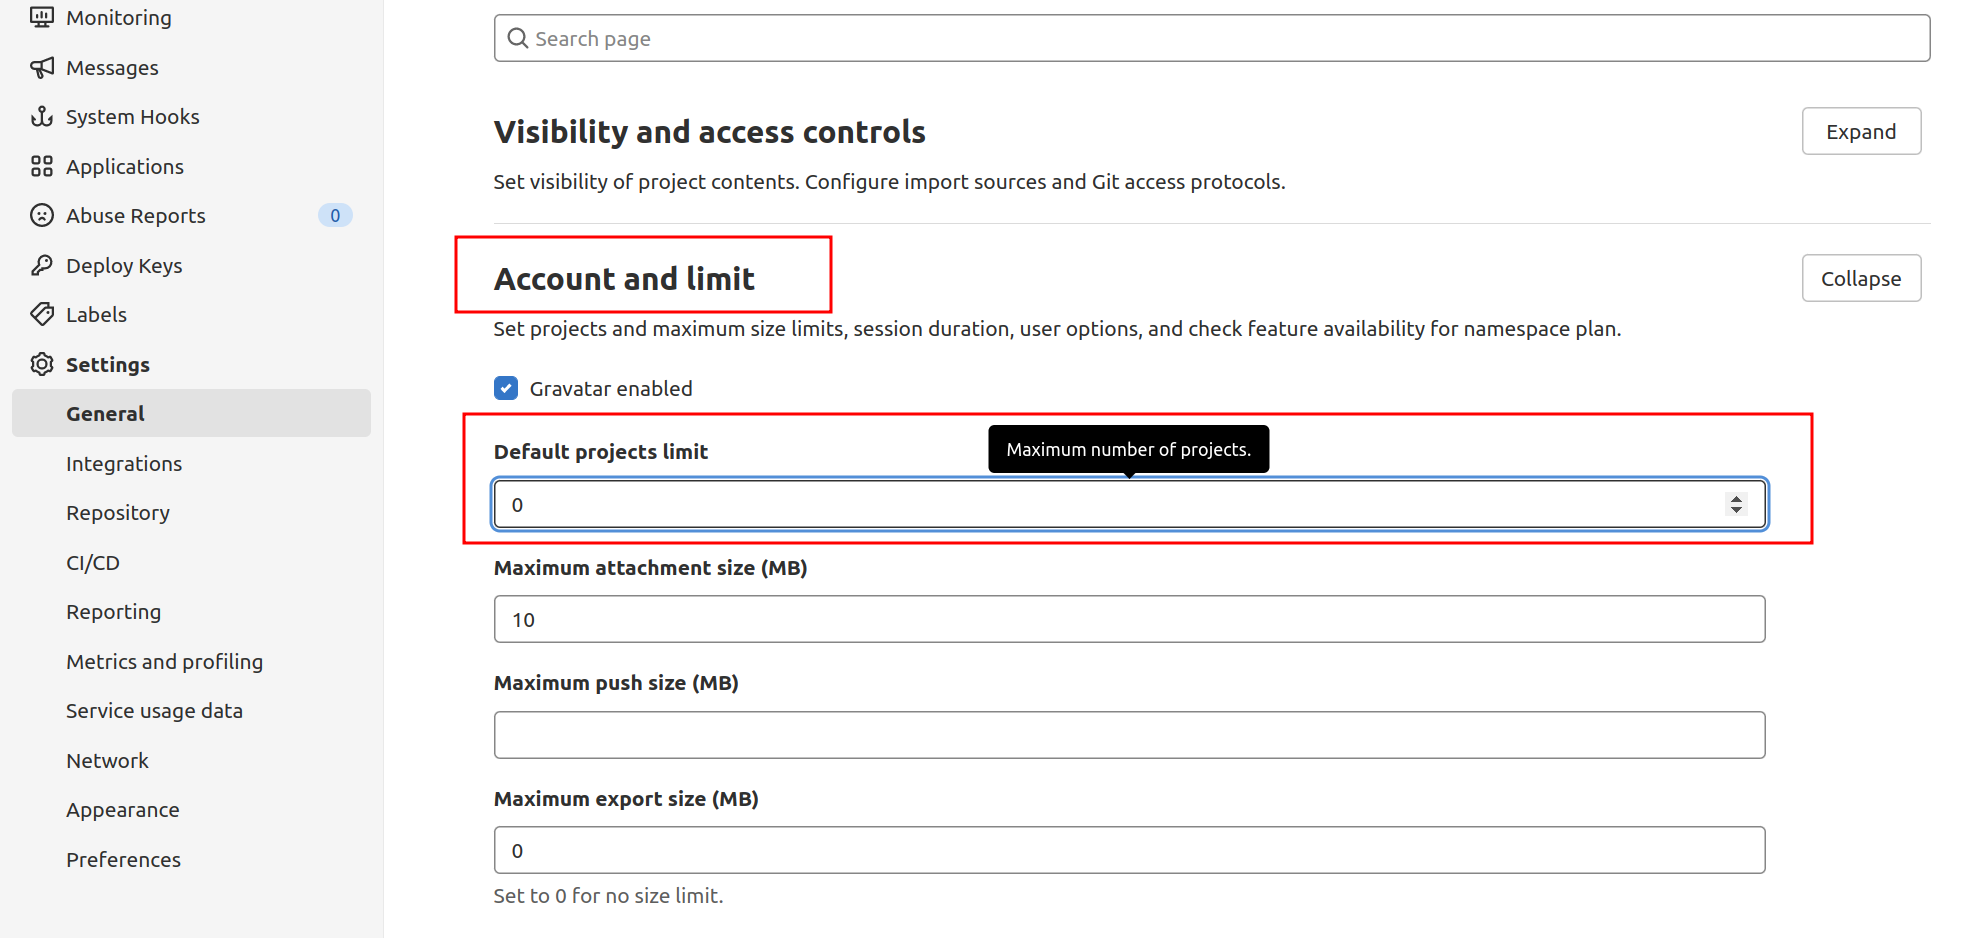 From the 'Account and limit' setting, you can set project limits to zero